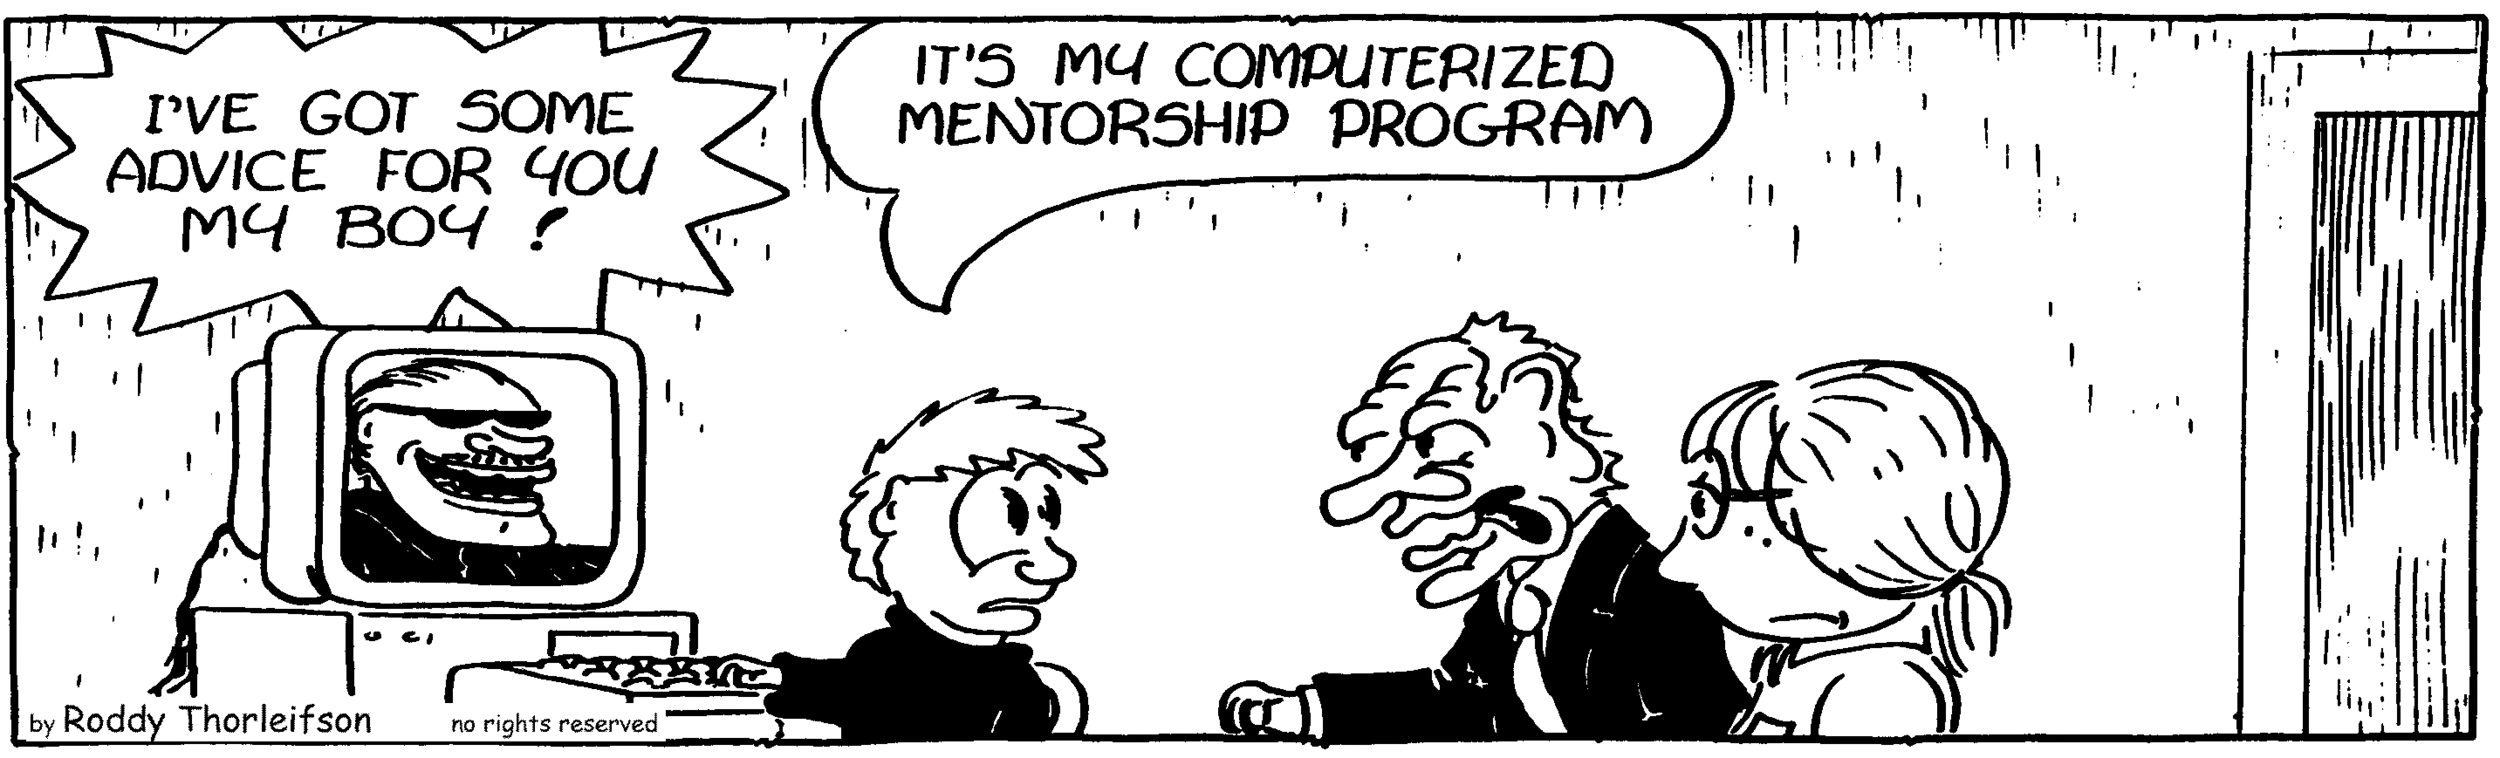 free cartoon education educating teaching mentorship and I've got some advice for you, boy.